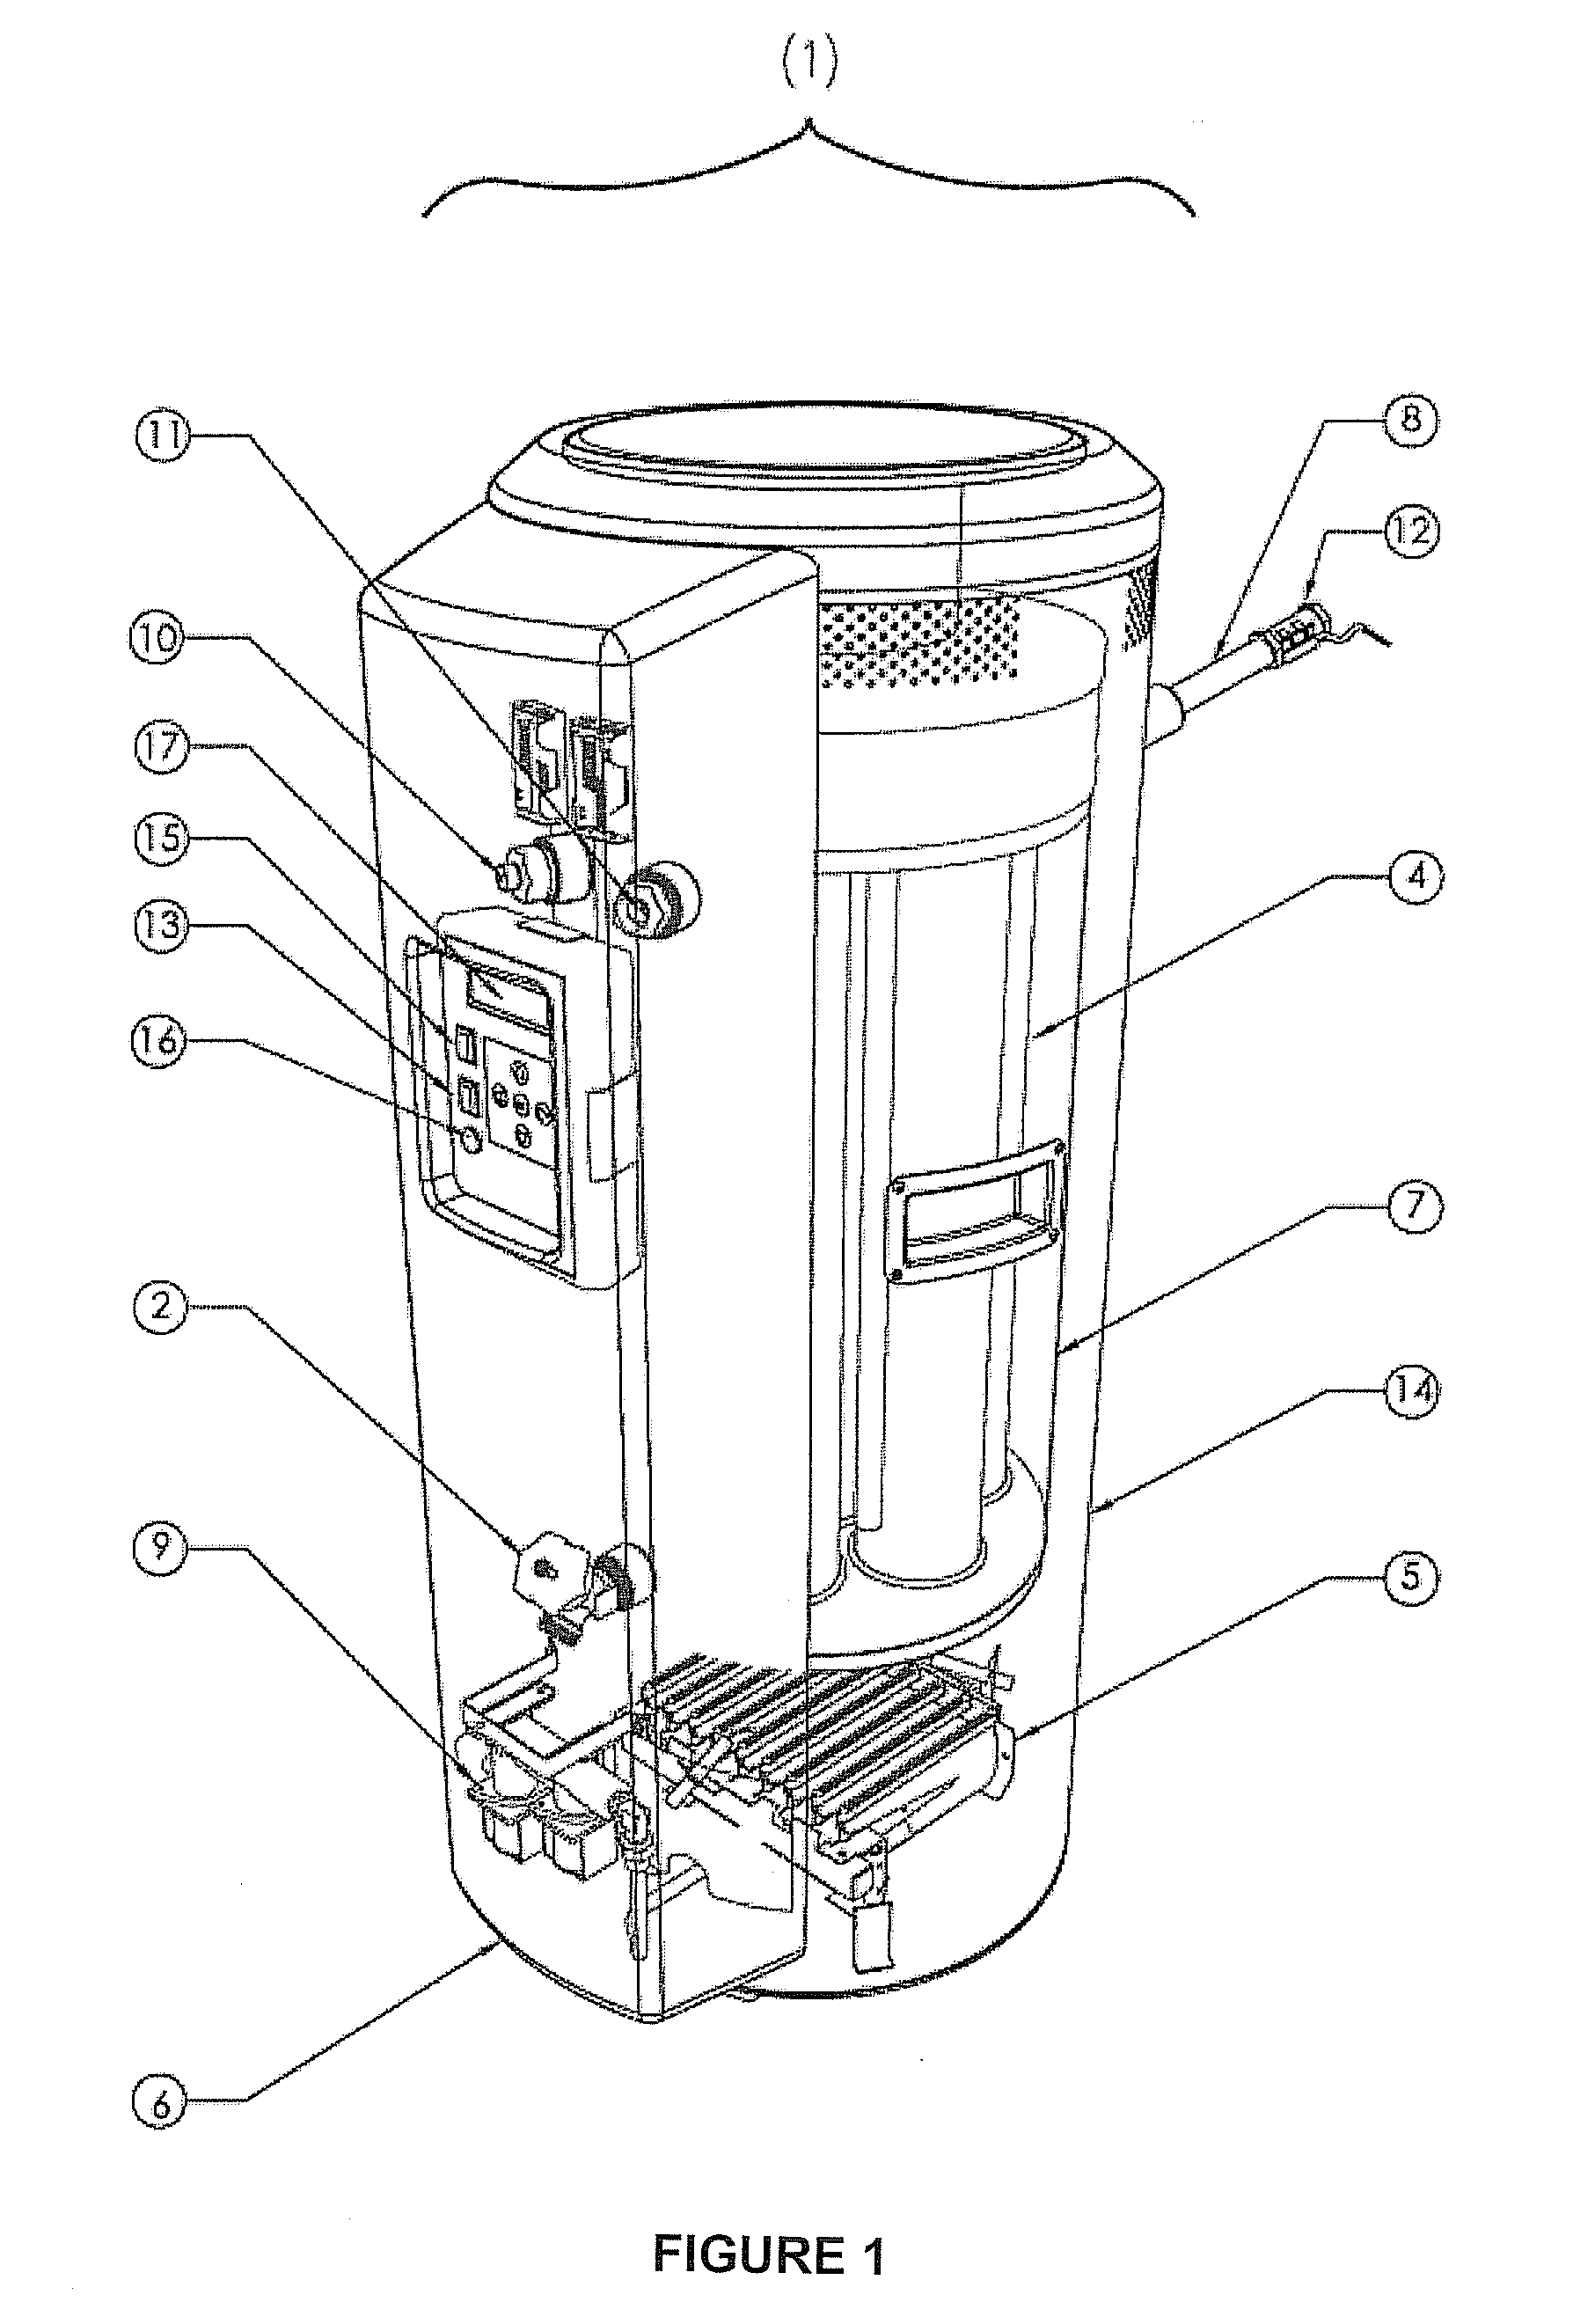 Water heater with ionized ignition and electronic control of temperature